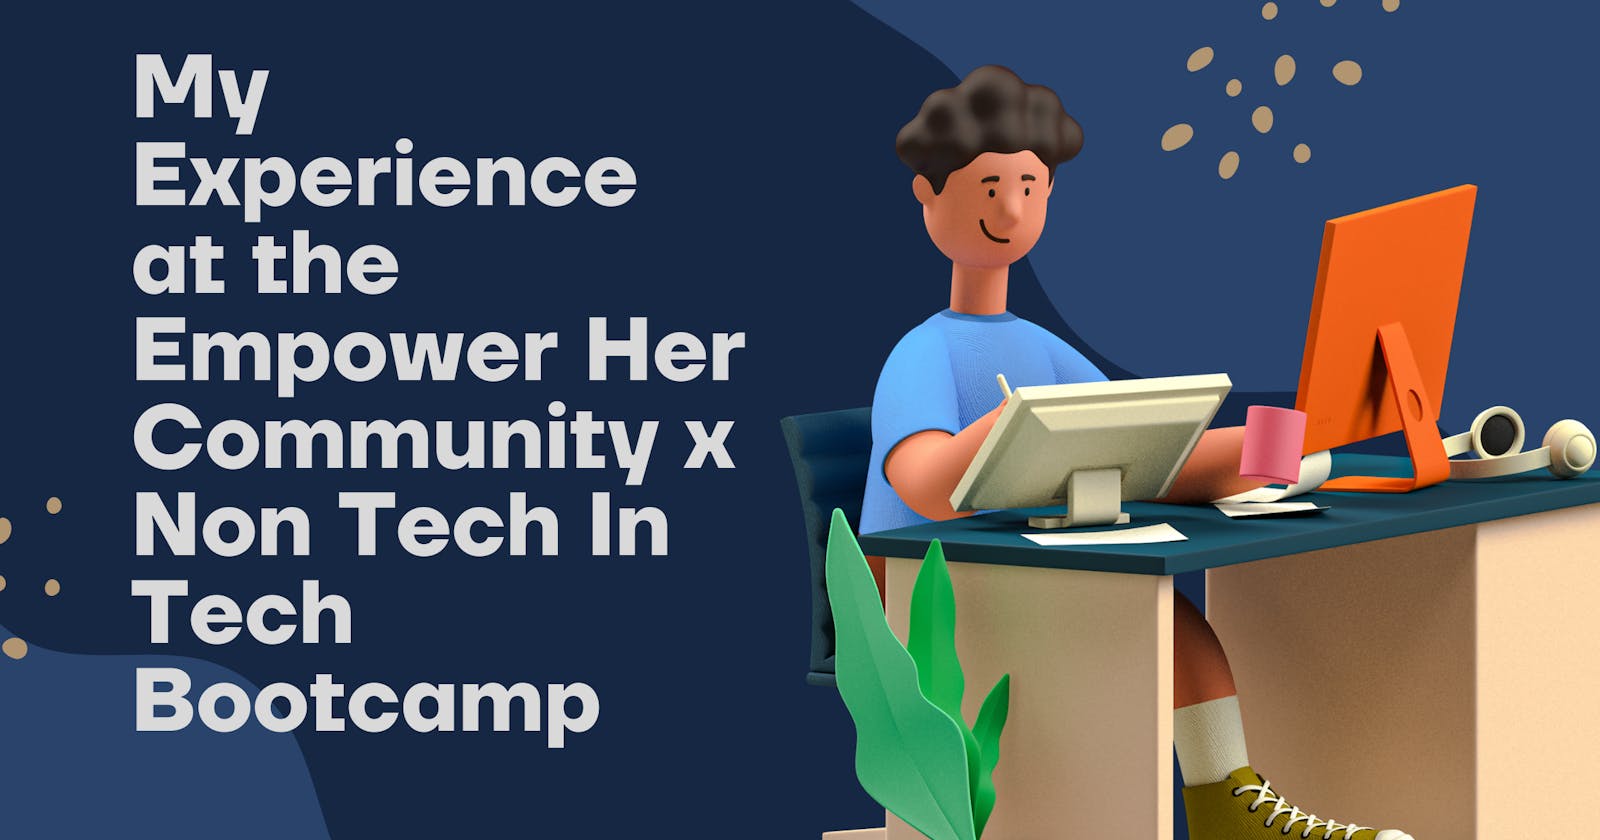 My Experience at the Empower Her Community x Non Tech In Tech Bootcamp